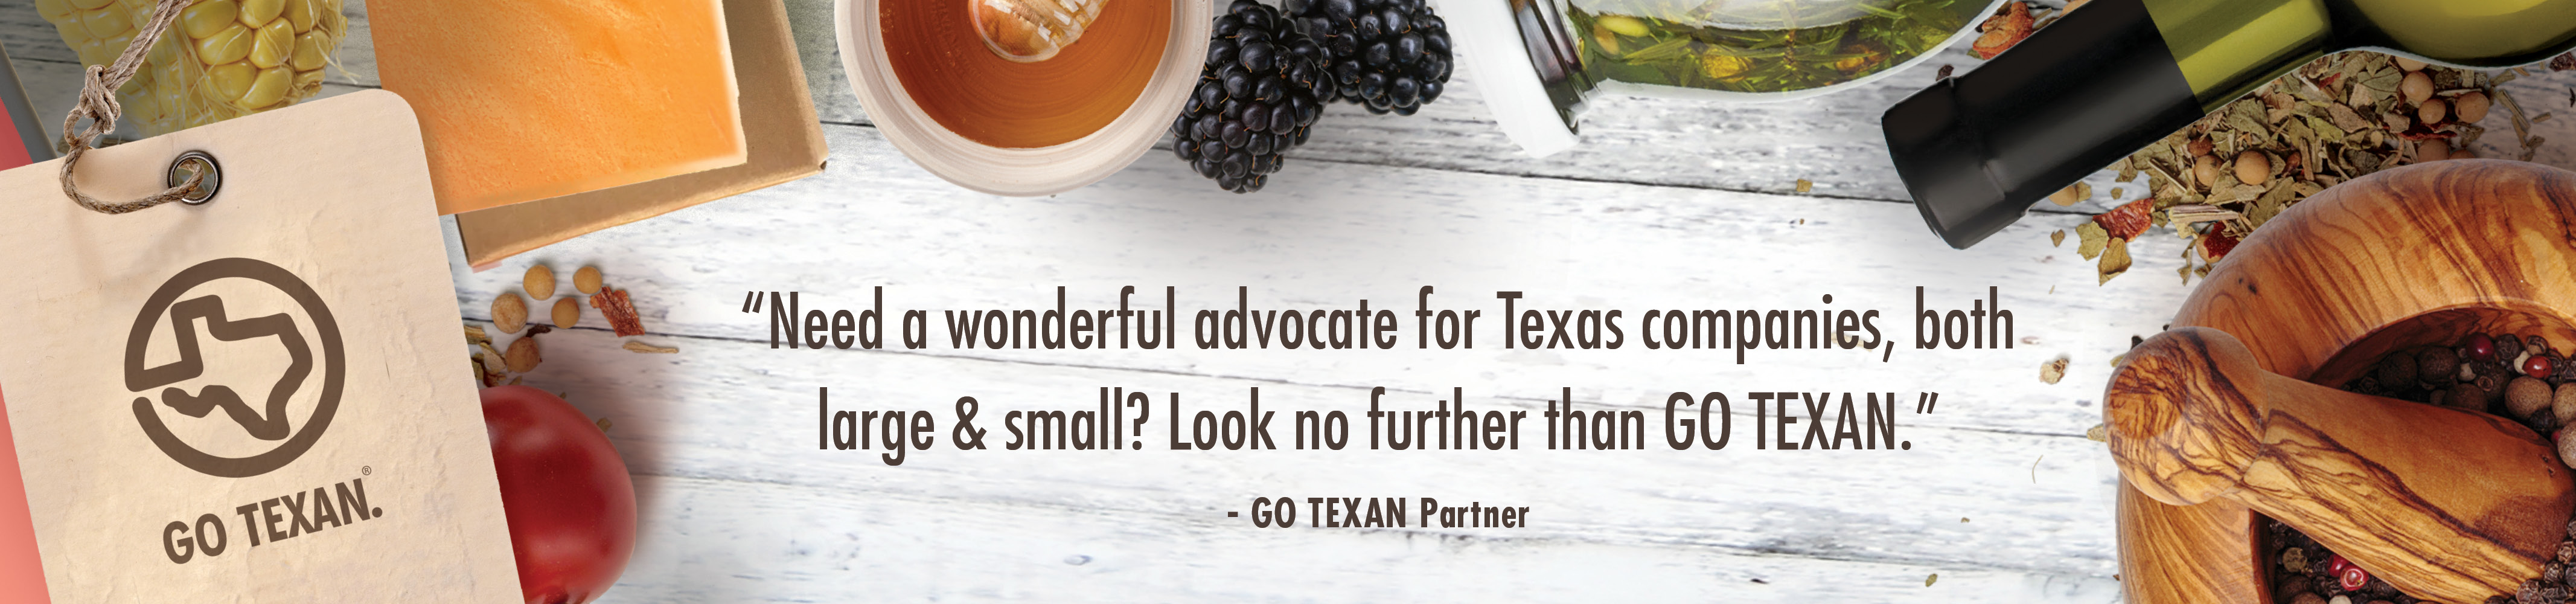 Quote: Need a wonderful advocate for Texas companies both large and small? Look no further than GO TEXAN